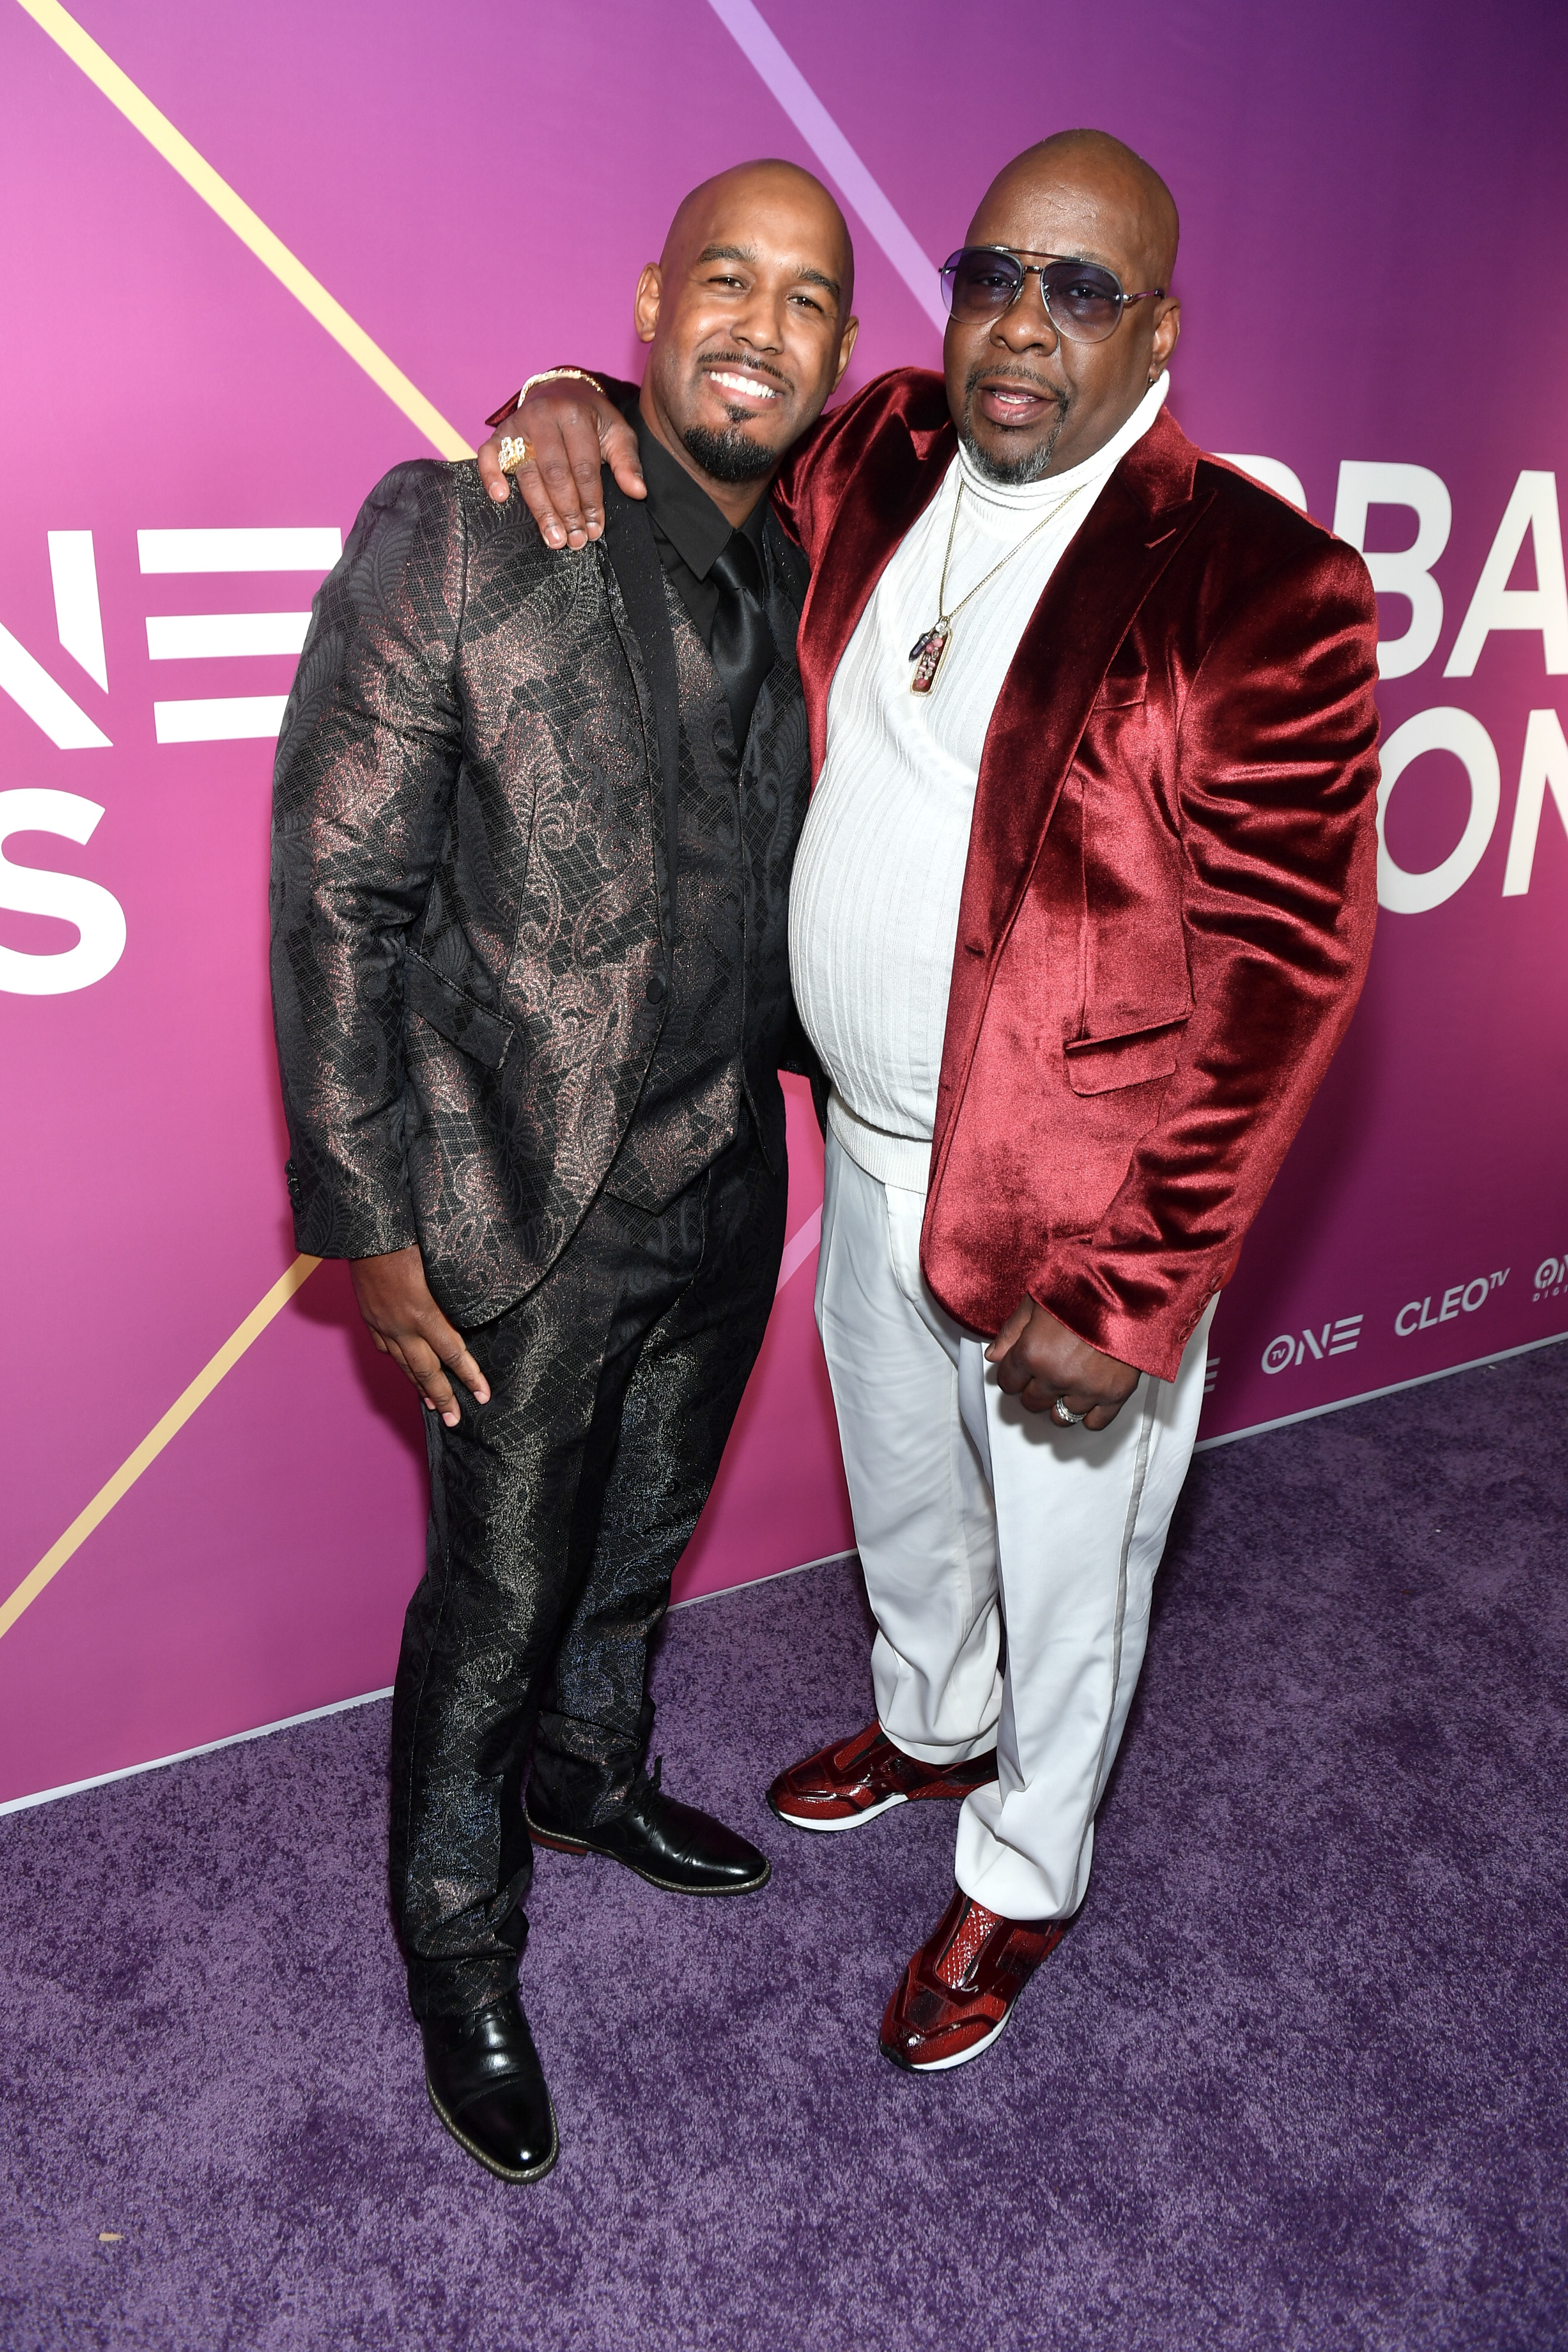 (L-R) Landon Brown and Bobby Brown attend the TV One Urban One Honors at The Eastern on December 2, 2022, in Atlanta, Georgia. | Source: Getty Images